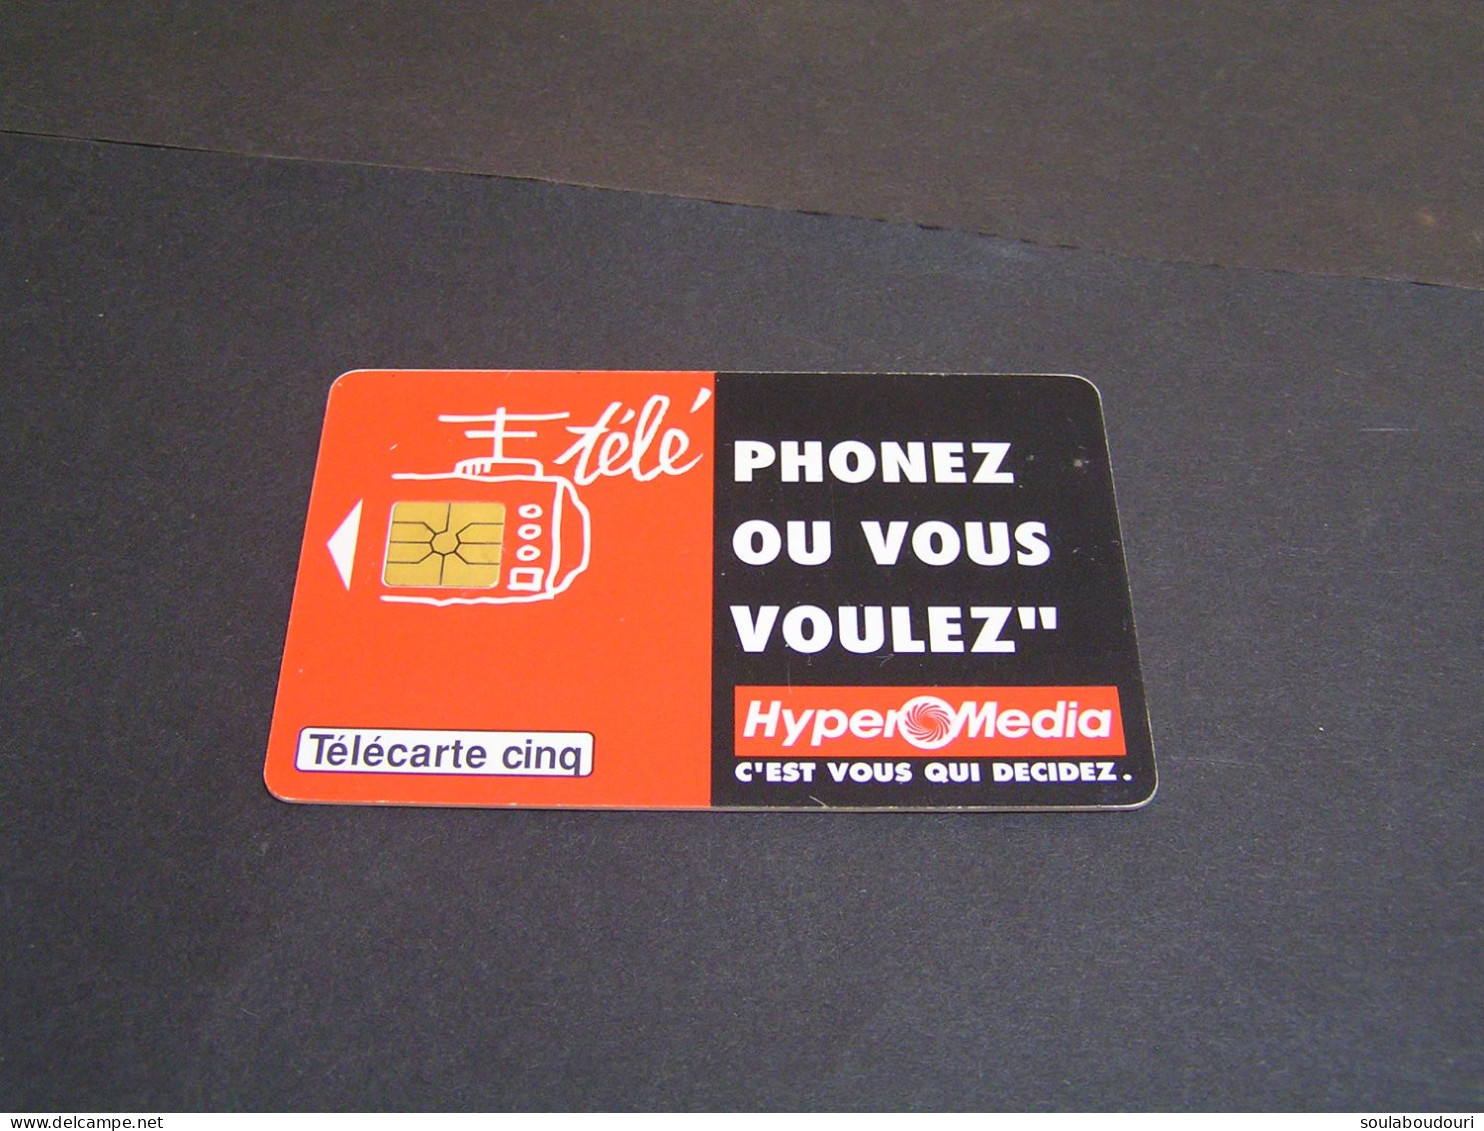 FRANCE Phonecards Private Tirage .16.000 Ex 04/94... - 5 Units